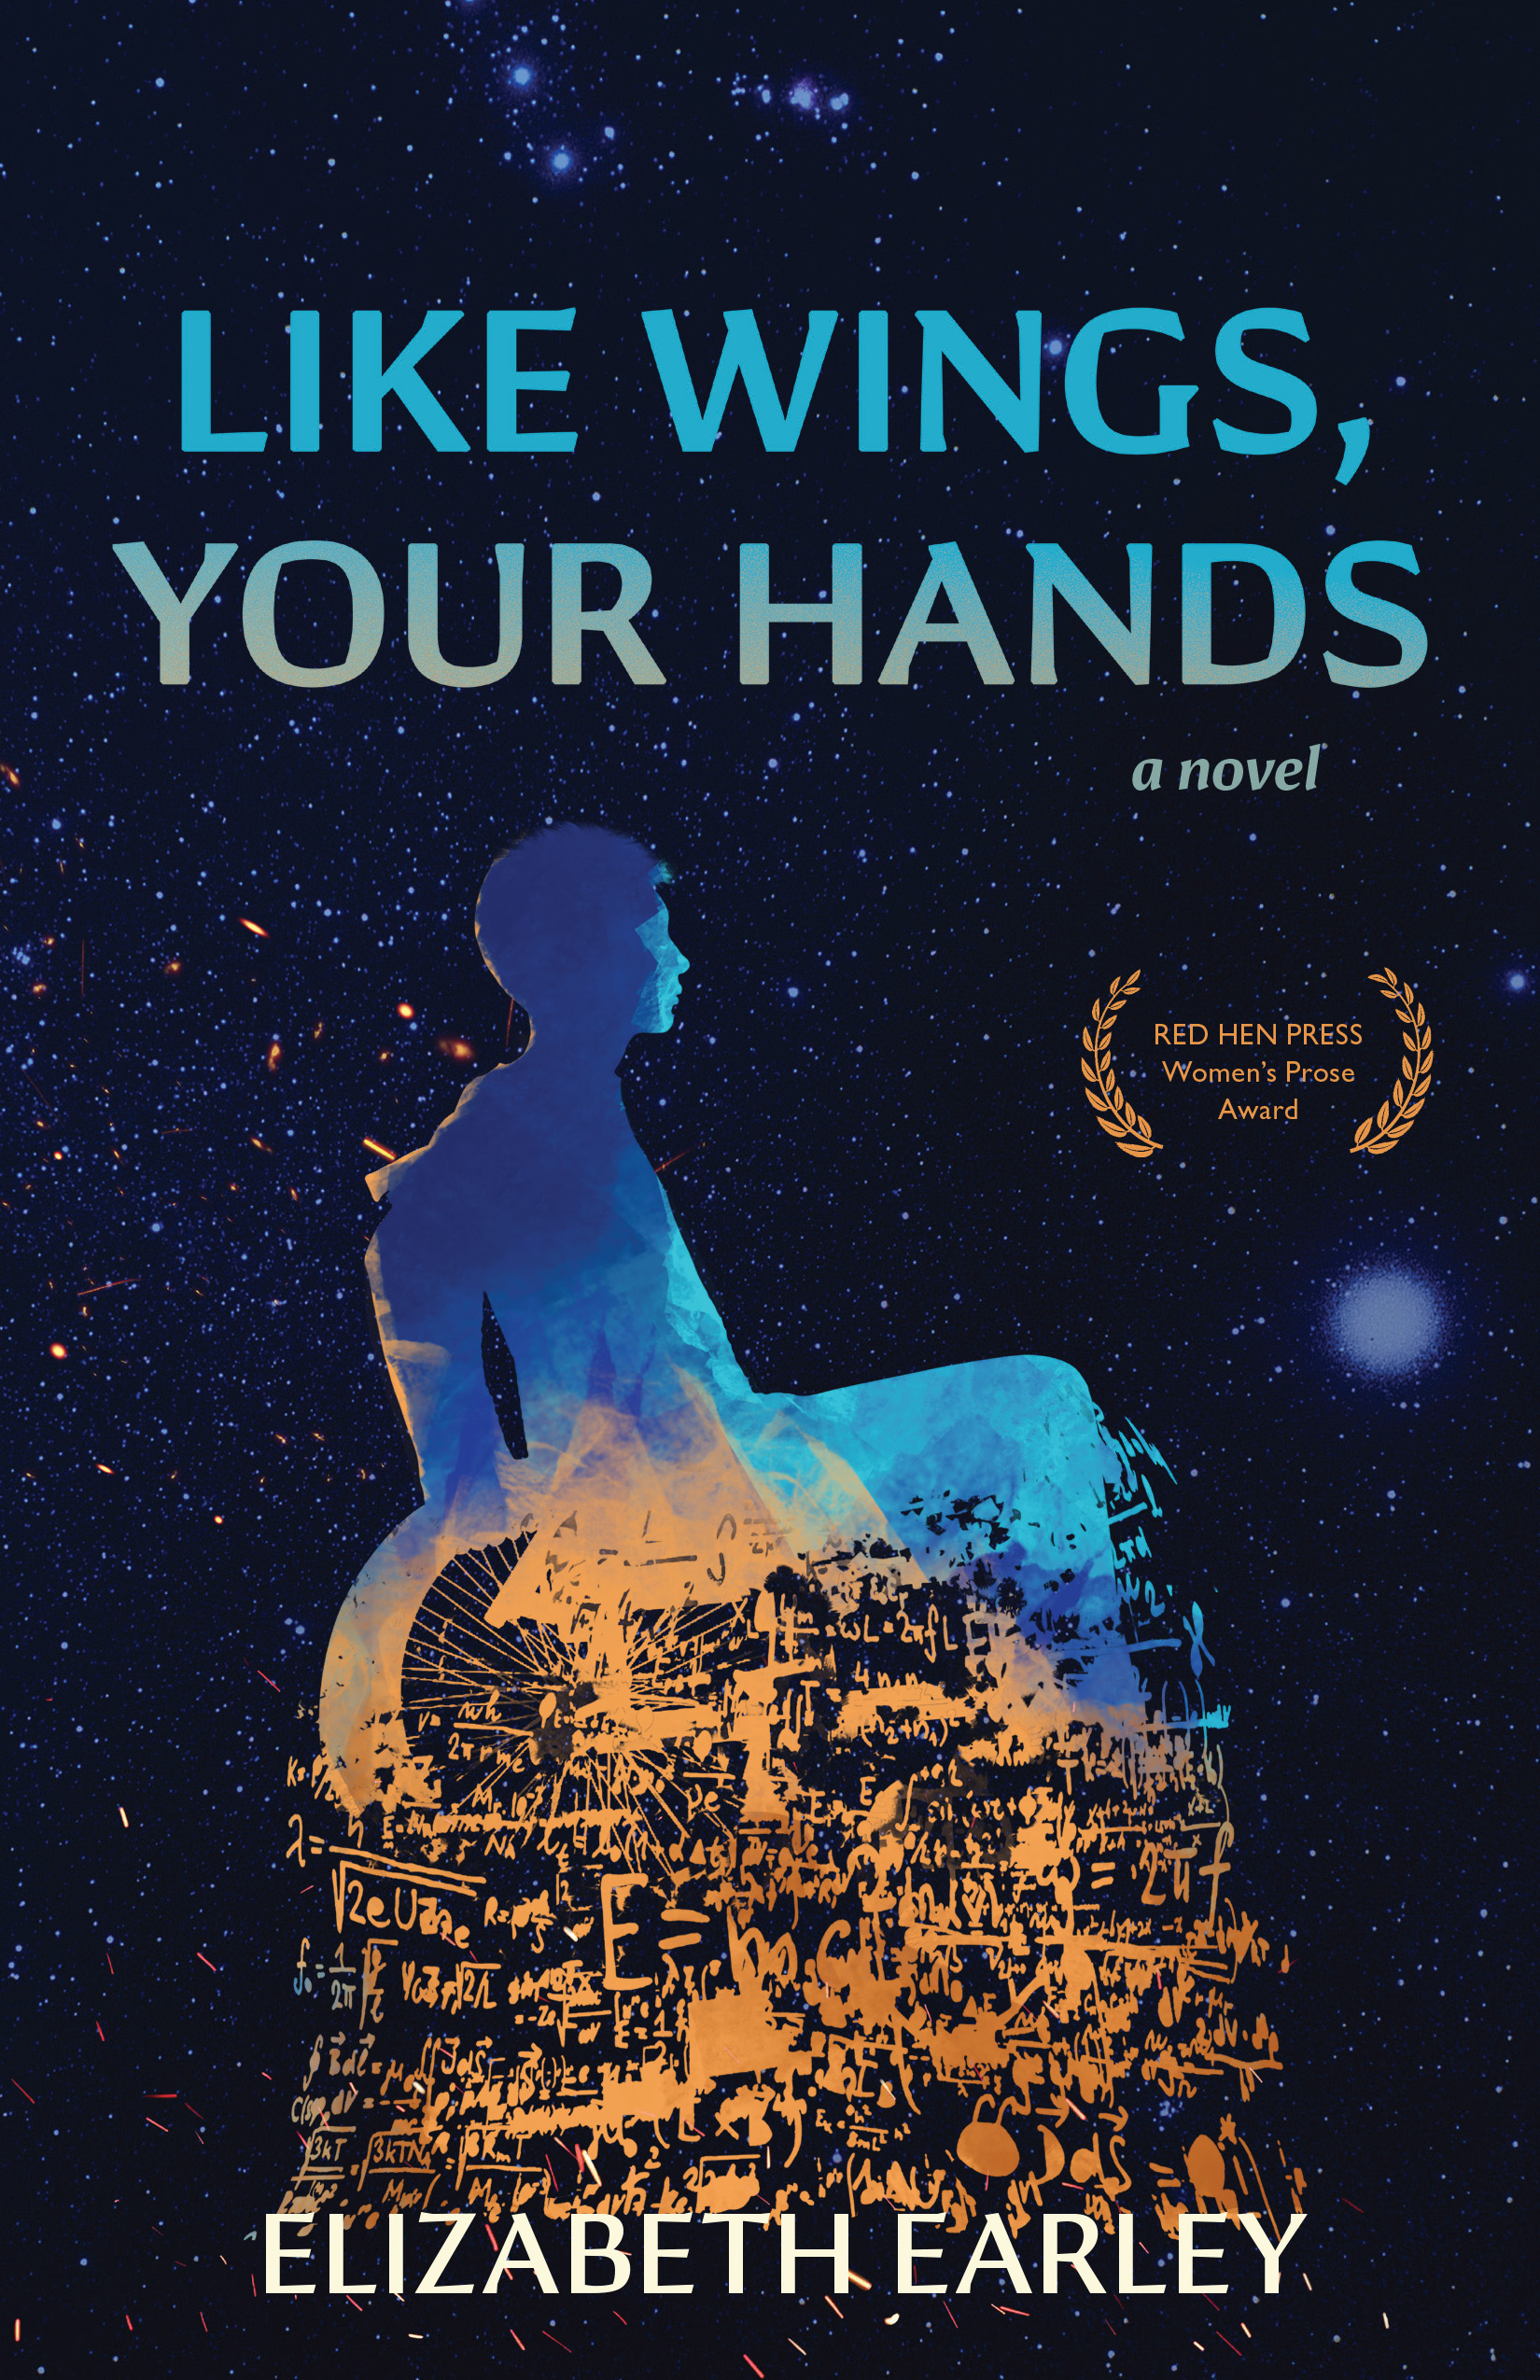 A starry sky as the background with a design of a boy sitting in wheelchair that dissolves towards the bottom into math equations and blue scrip that reads Like Wings, Your Hands a novel by Elizabeth Earley.